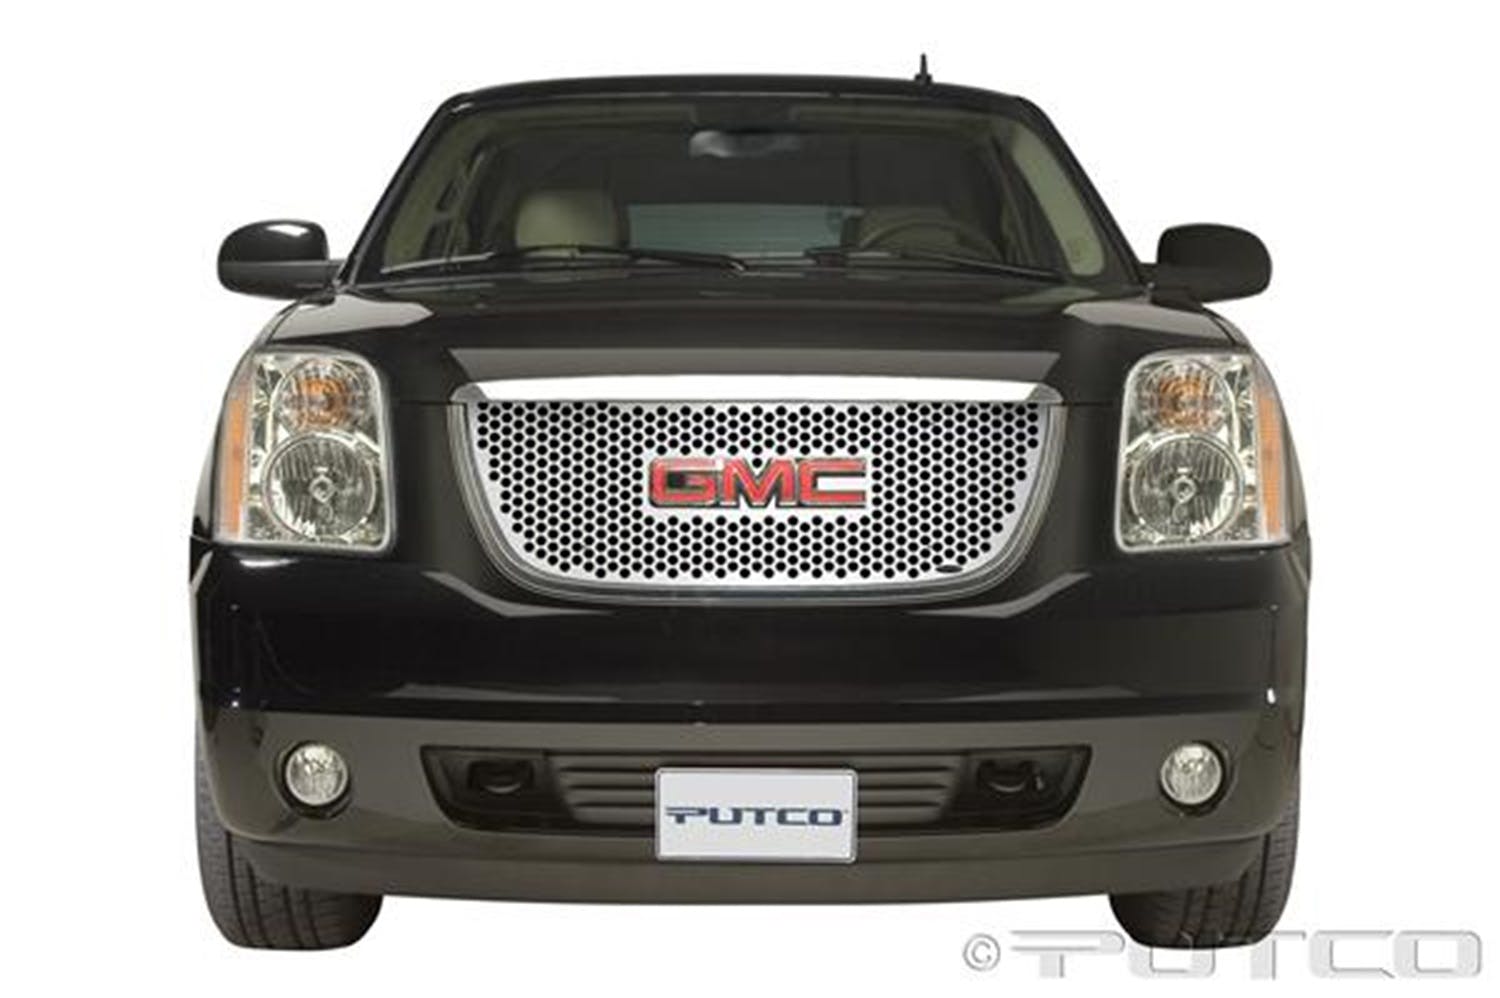 Putco 84159 Punch Stainless Steel Grilles